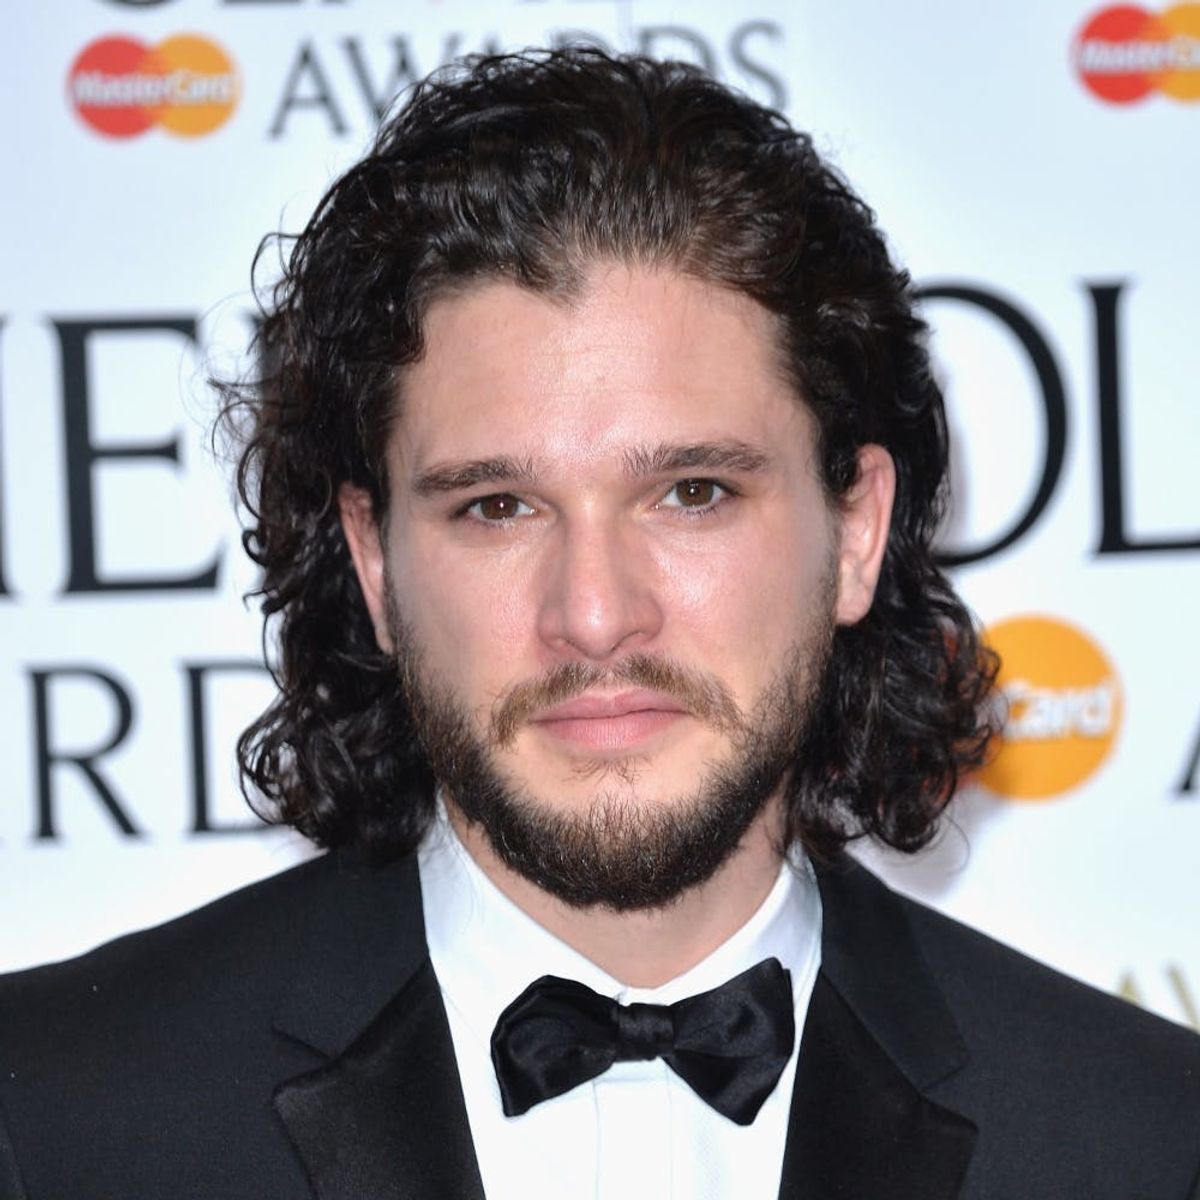 Kit Harington Shaved His Beard and Fans Are Freaking Out